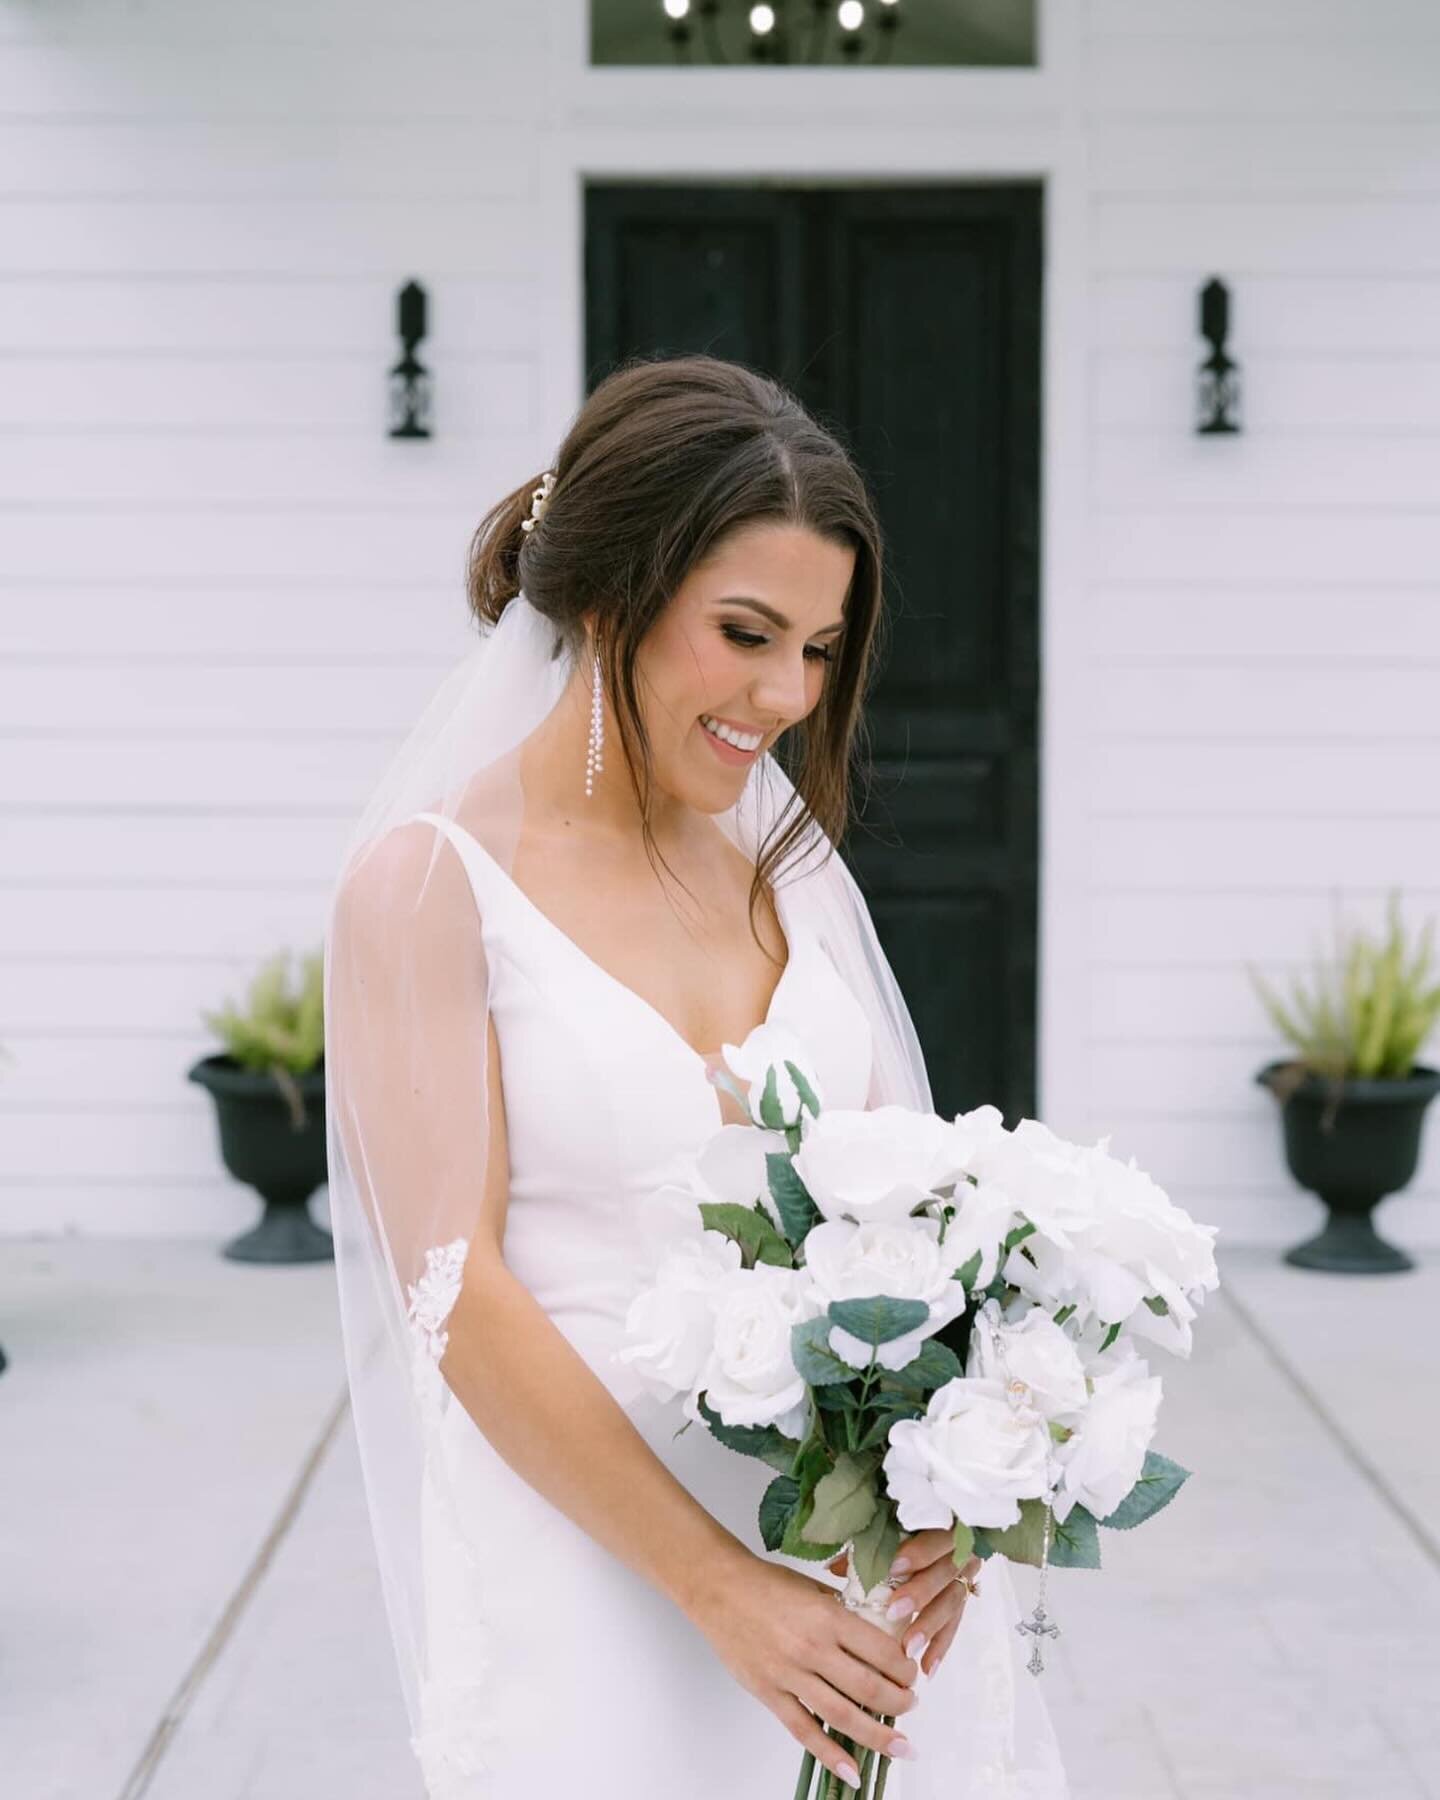 Classic + timeless 🤍

I get the honor of making so many different styles of wedding florals, and my specialty is definitely textured + modern boho bouquets. However, when I got to make these delicate, classic, white rose bouquets for Ashley + her br